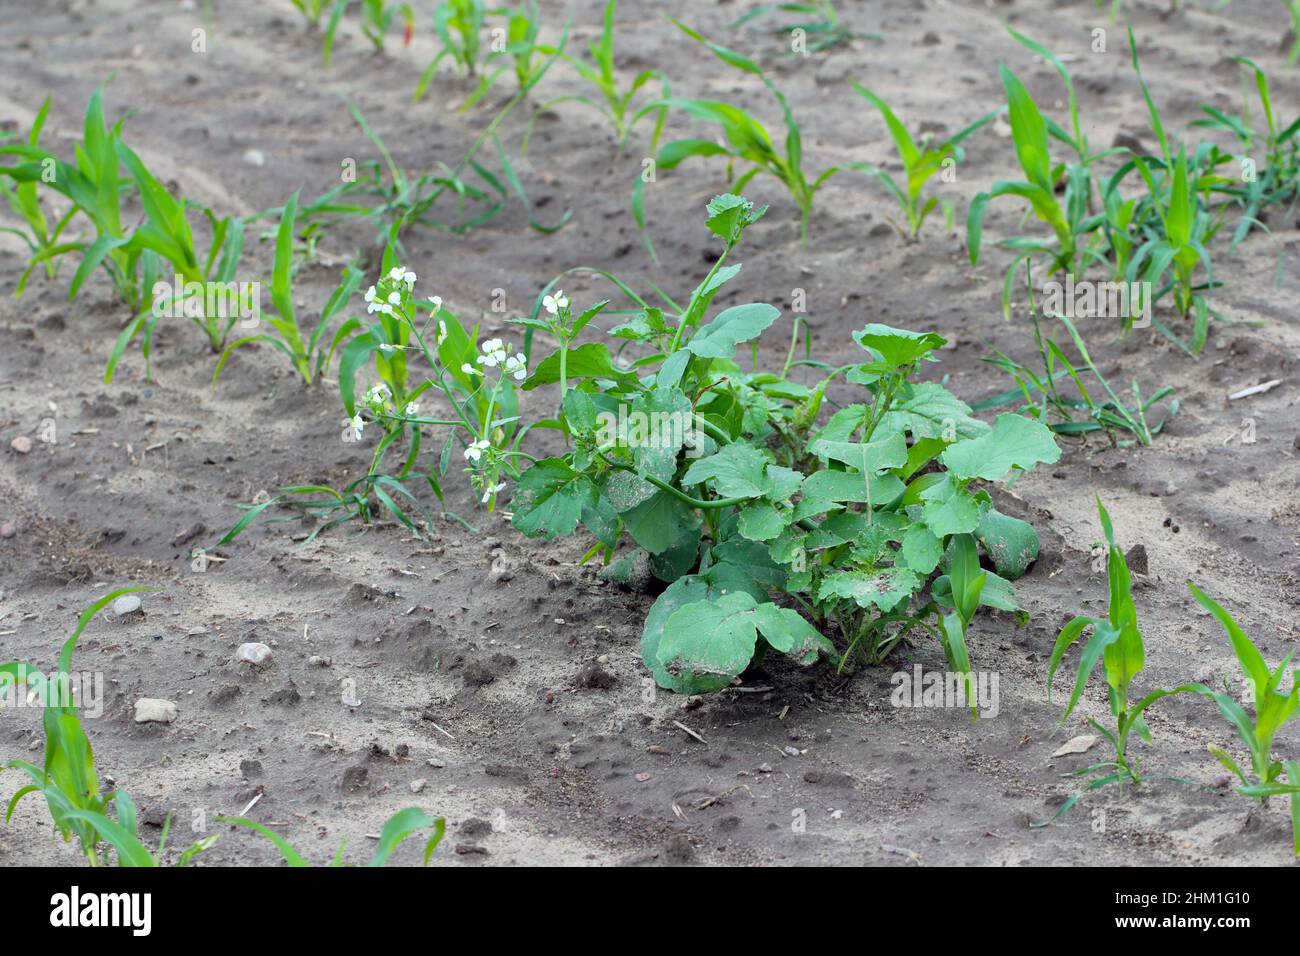 Raphanus sativus L. var. oleiformis as a residue after catch crop rotation - a weed in corn cultivation. Stock Photo